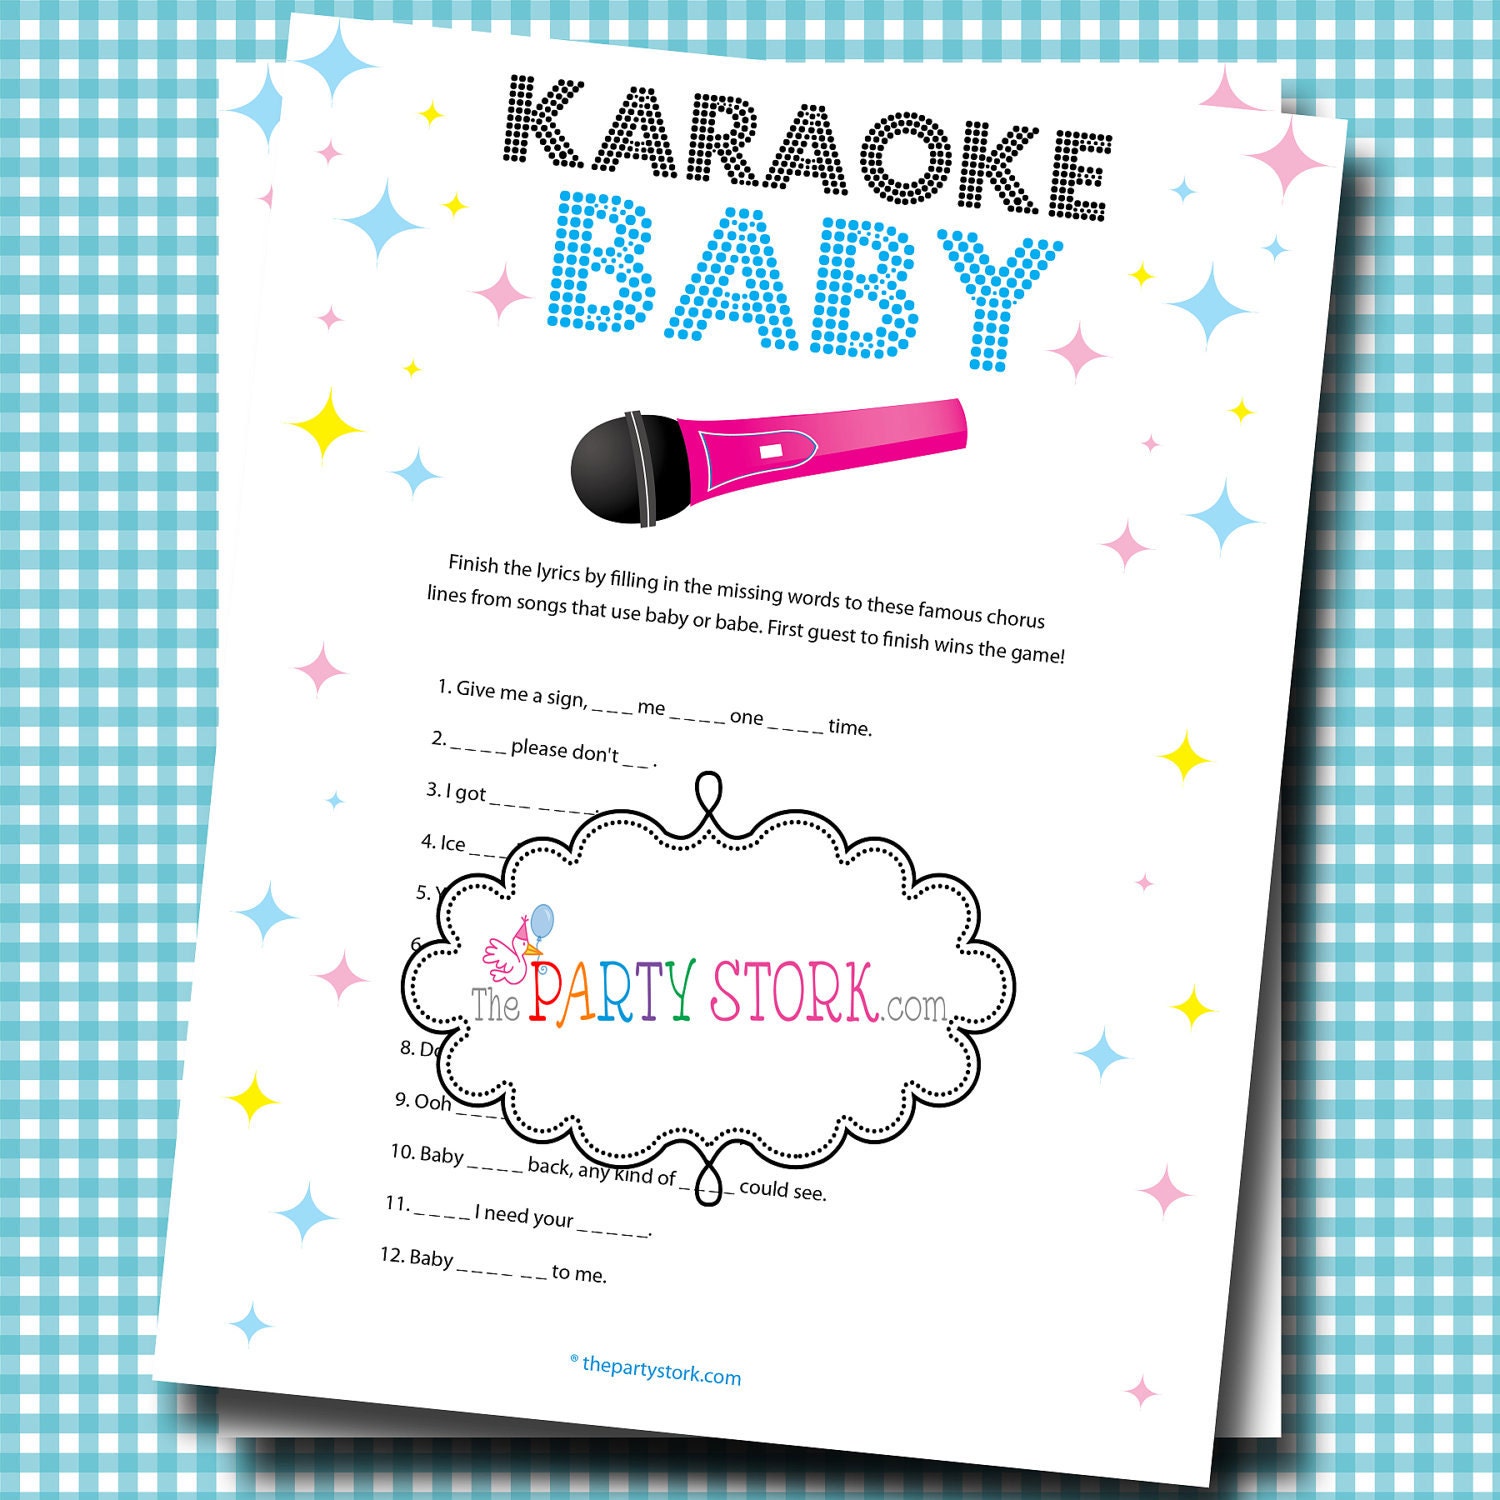 juegos divertidos baby shower Free Printable Baby Shower Games for Boys | 1500 x 1500